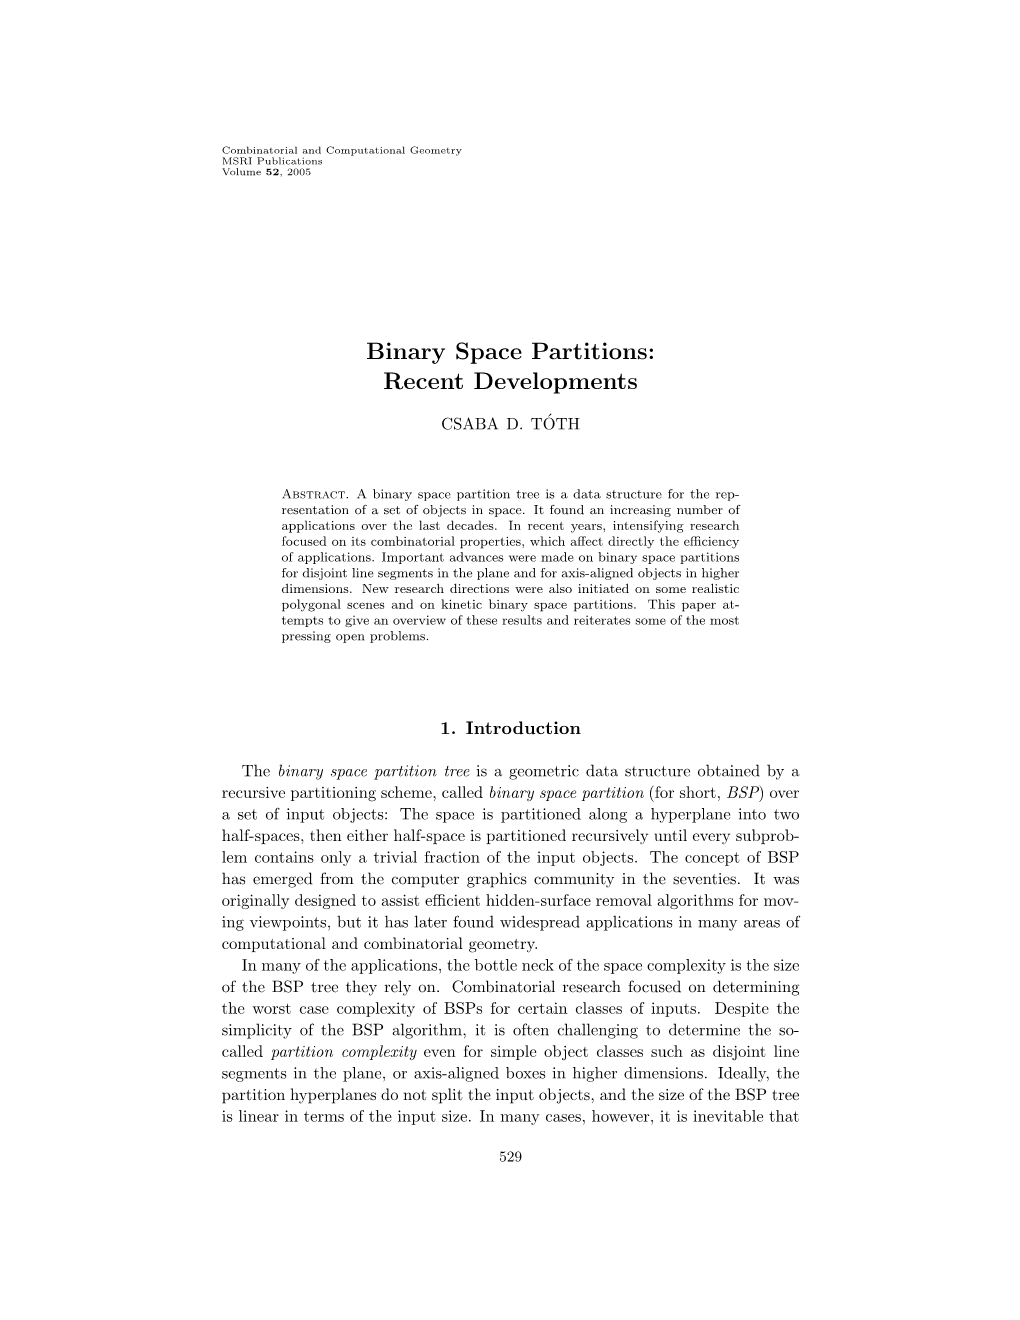 Binary Space Partitions: Recent Developments